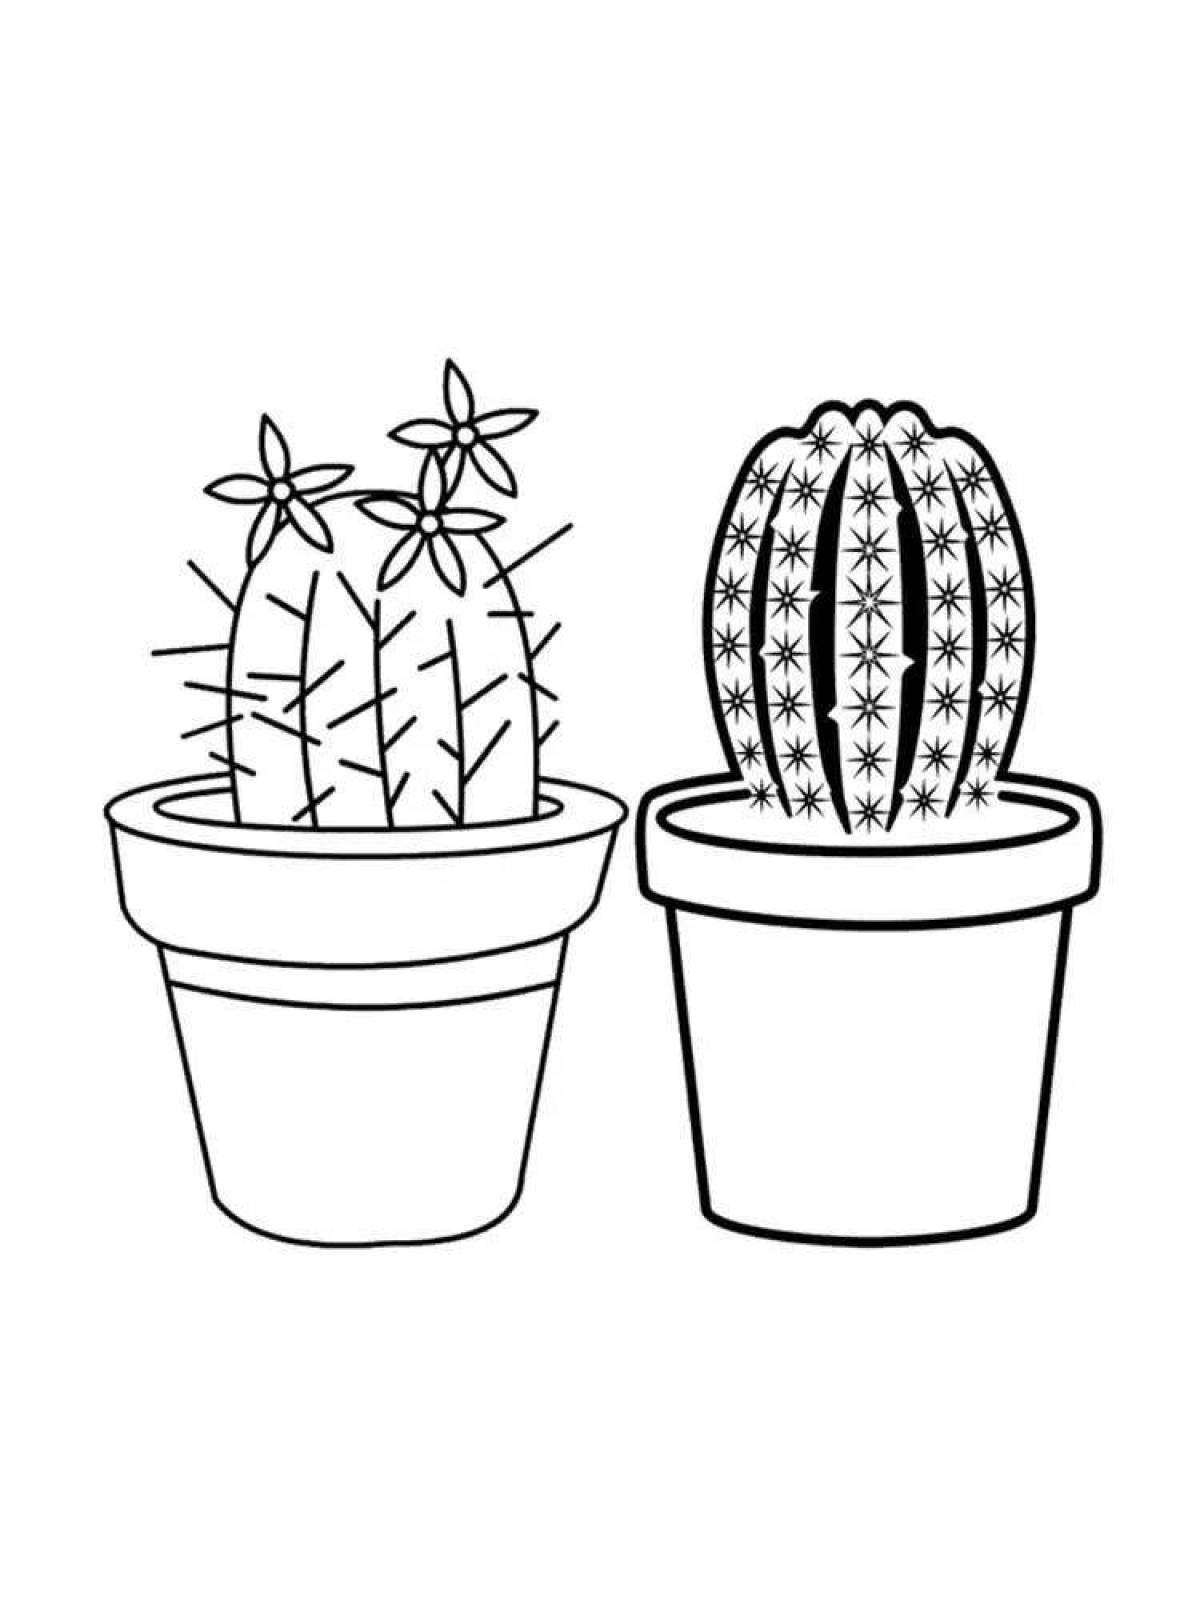 Potted cactus #13